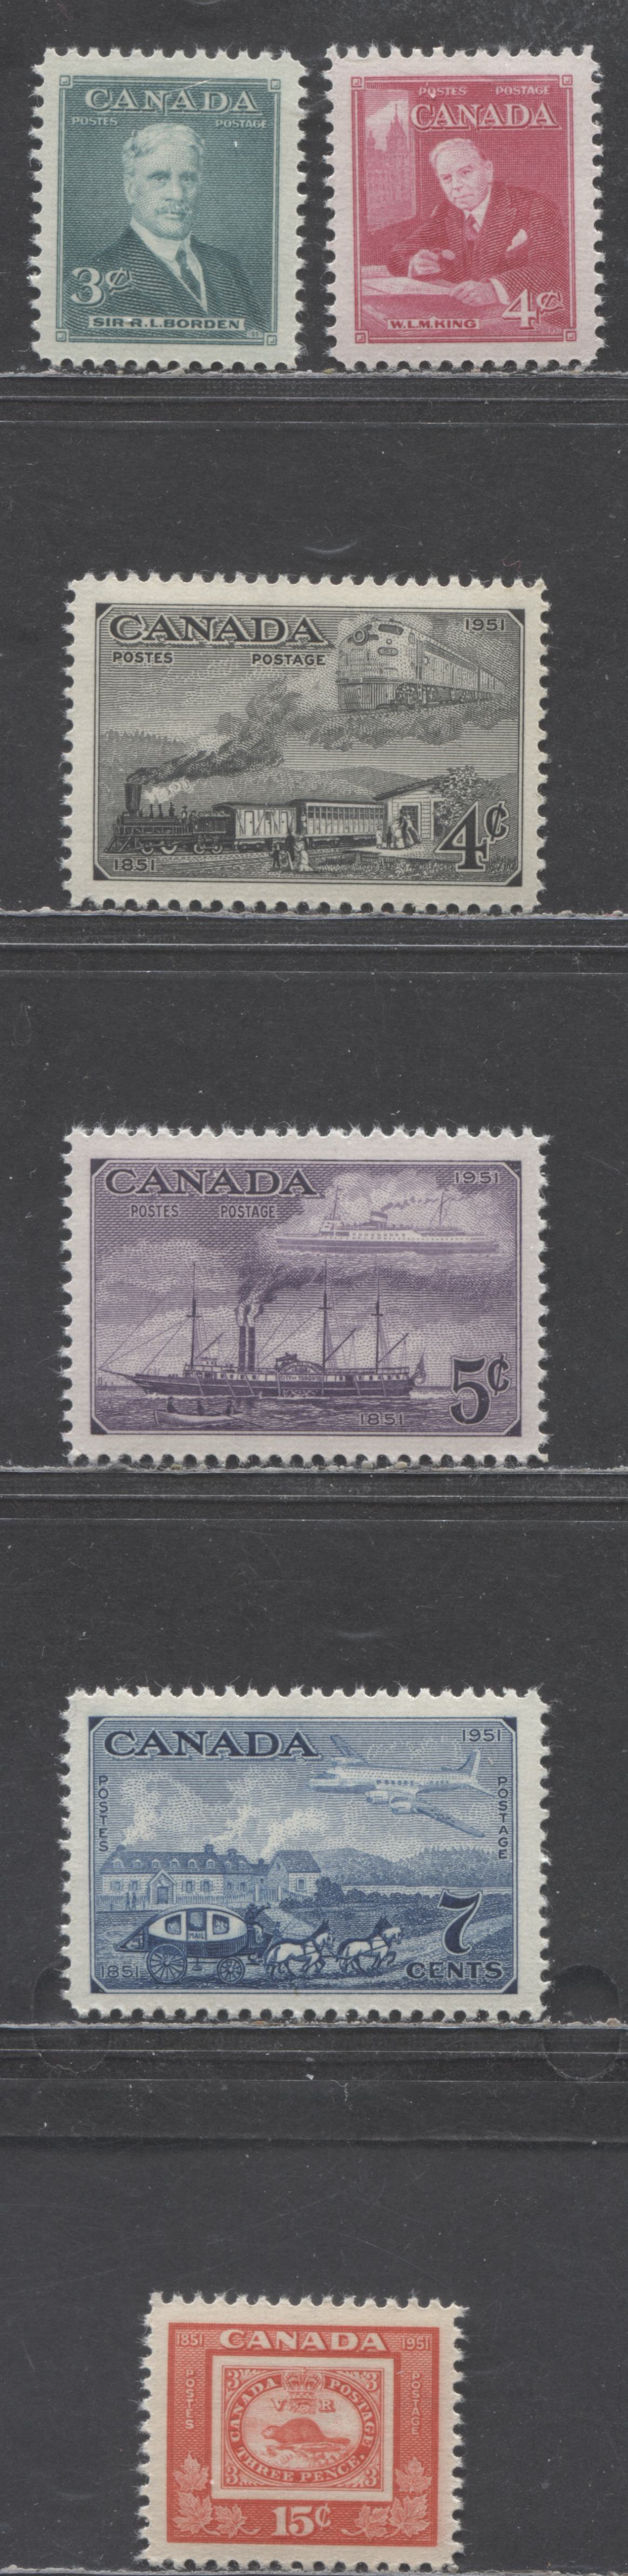 Canada #303-304, 311-314 3c, 4c, 5c, 7c, 15c Various Colours Various Subjects, 1951 Prime Ministers Issue & CAPEX '51 , 6 VFNH Singles,Smooth & Horizontally Ribbed Papers, Cream Gloss & Semi-Gloss Gum All Selected For Centering